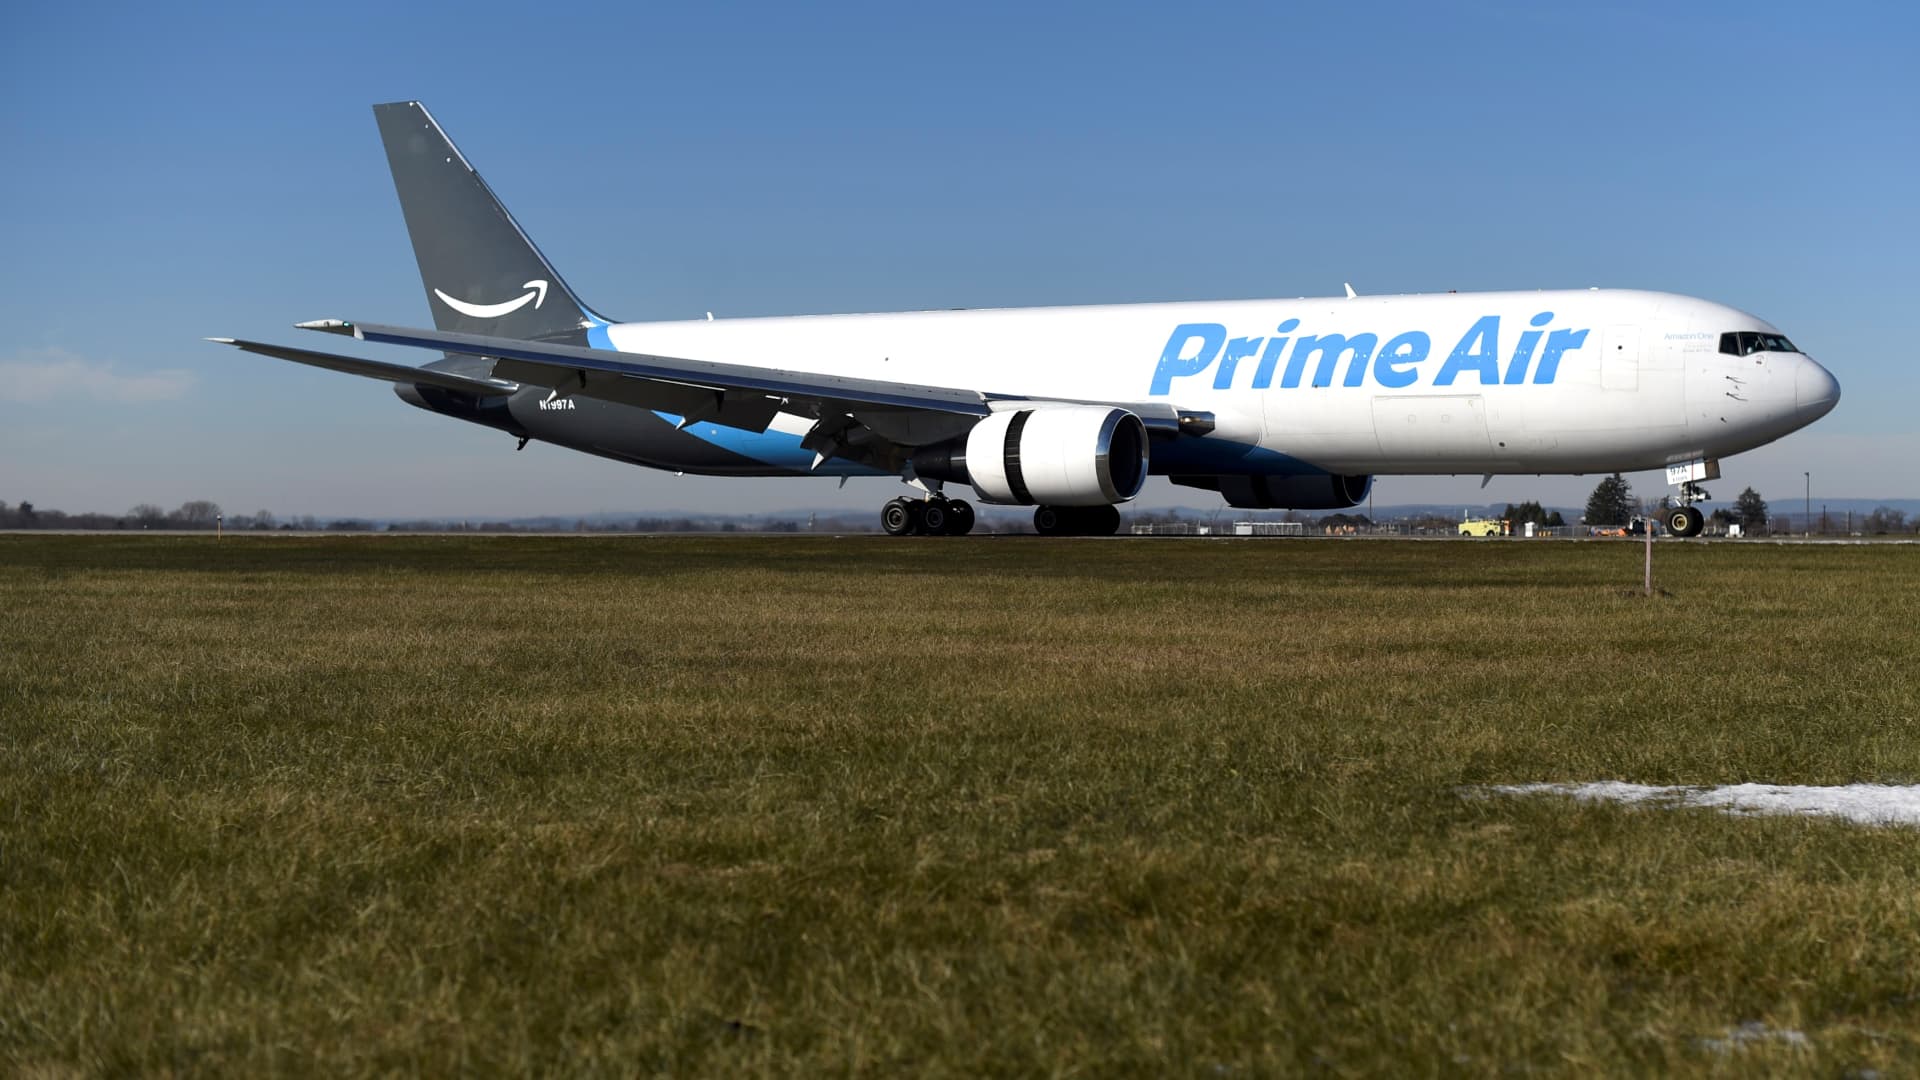 Amazon’s air cargo head changes jobs, will now oversee workplace safety unit